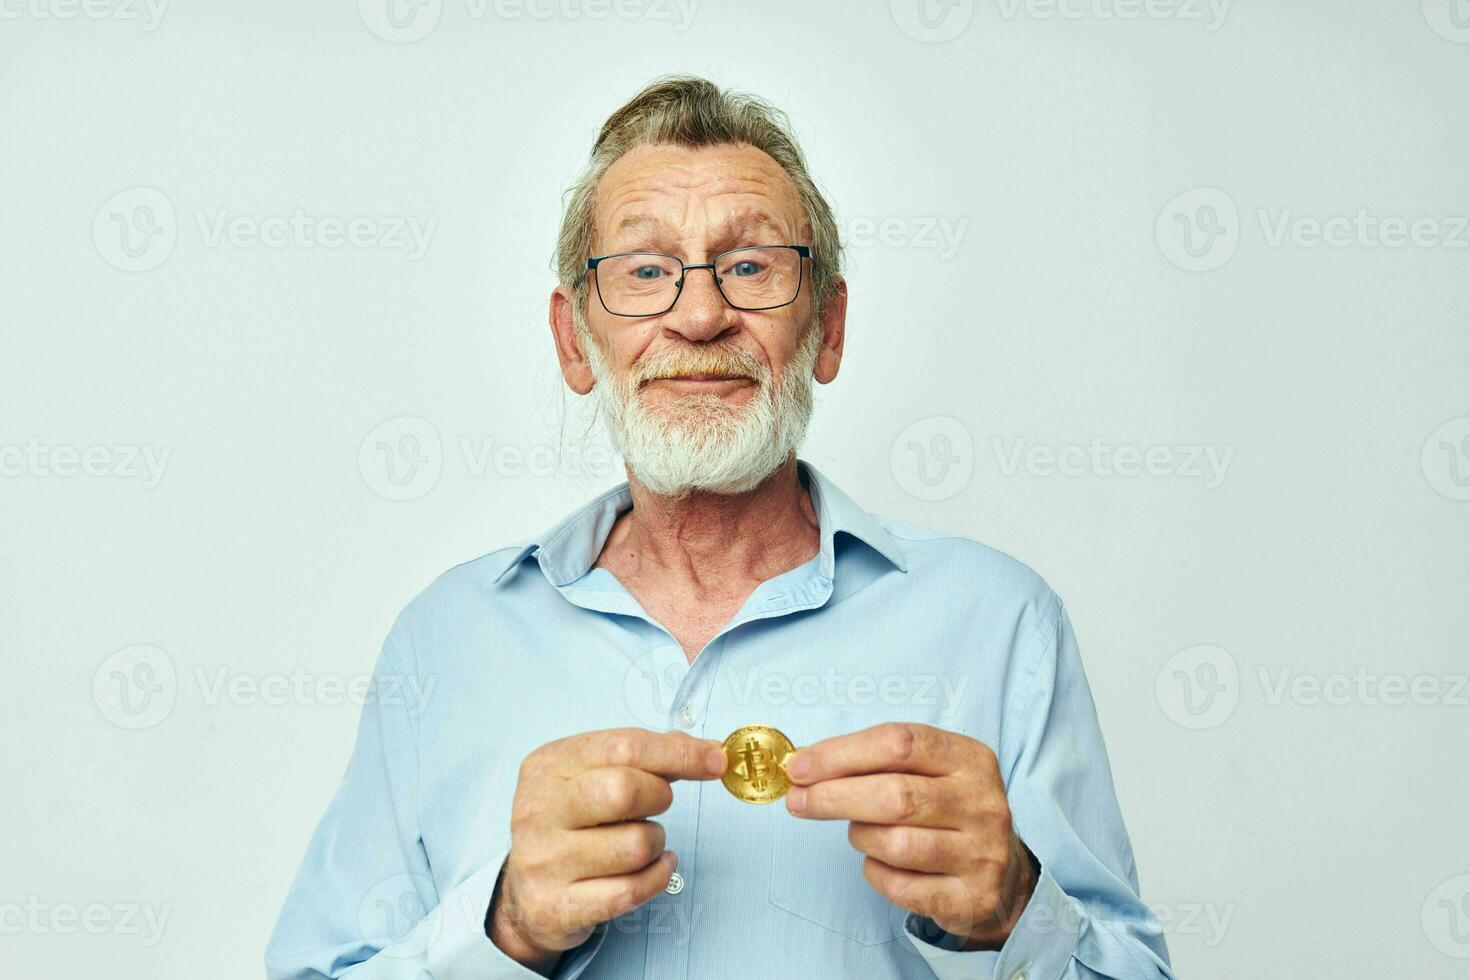 Portrait of happy senior man cryptocurrency bitcoin investment light background photo